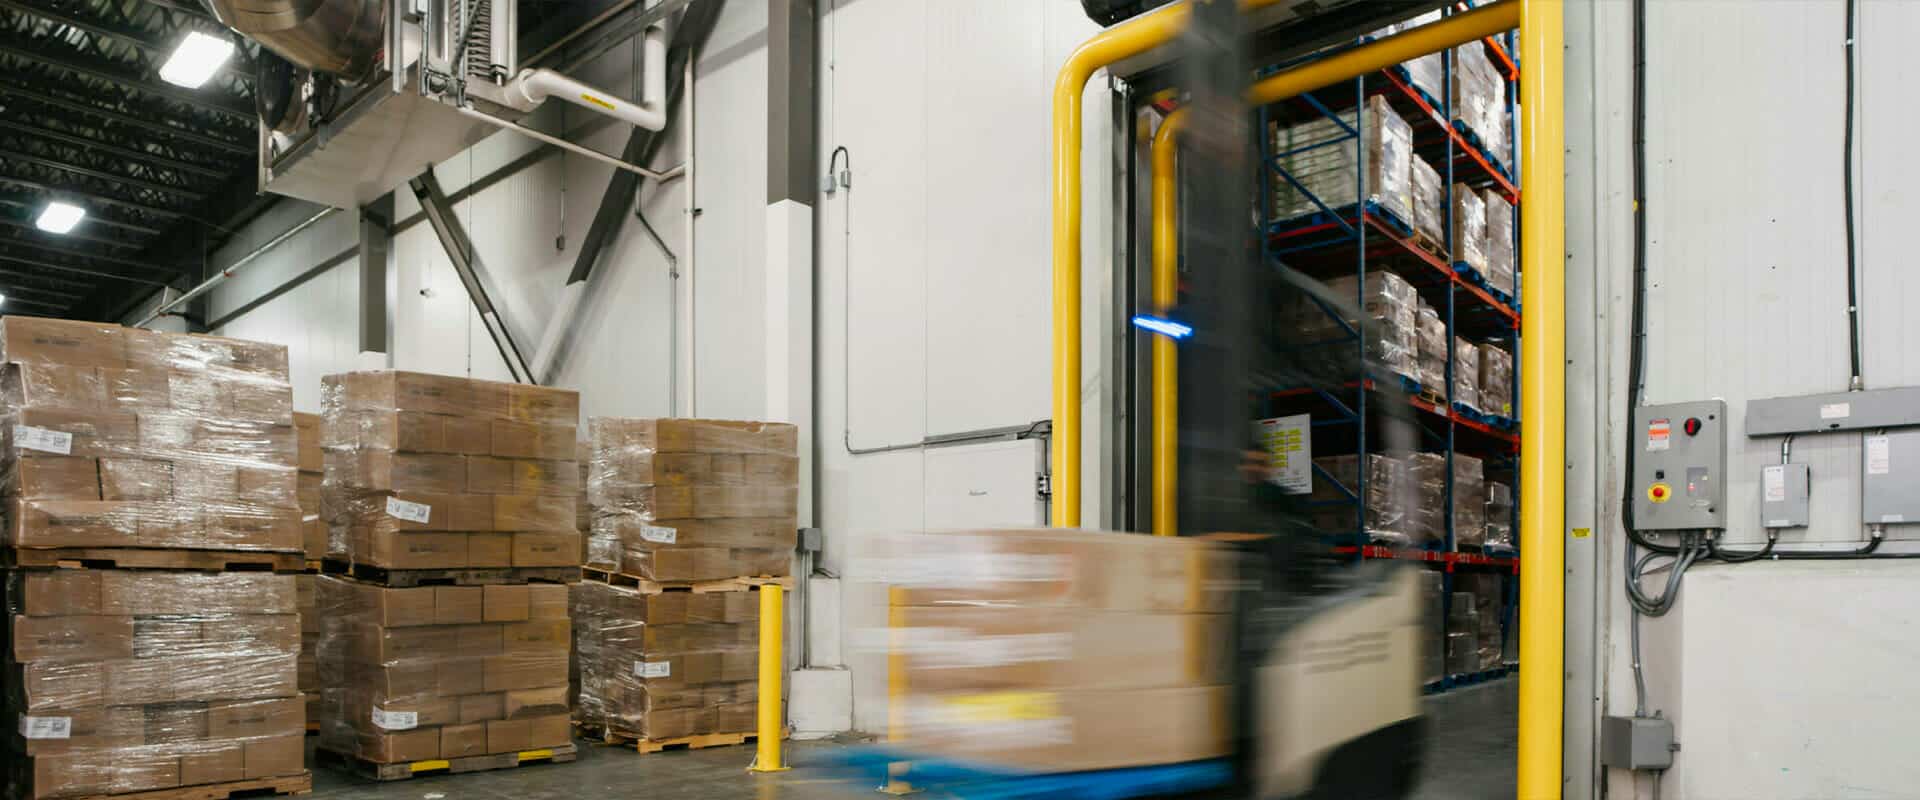 In a warehouse, a palette of frozen food items is being transported from one location to another